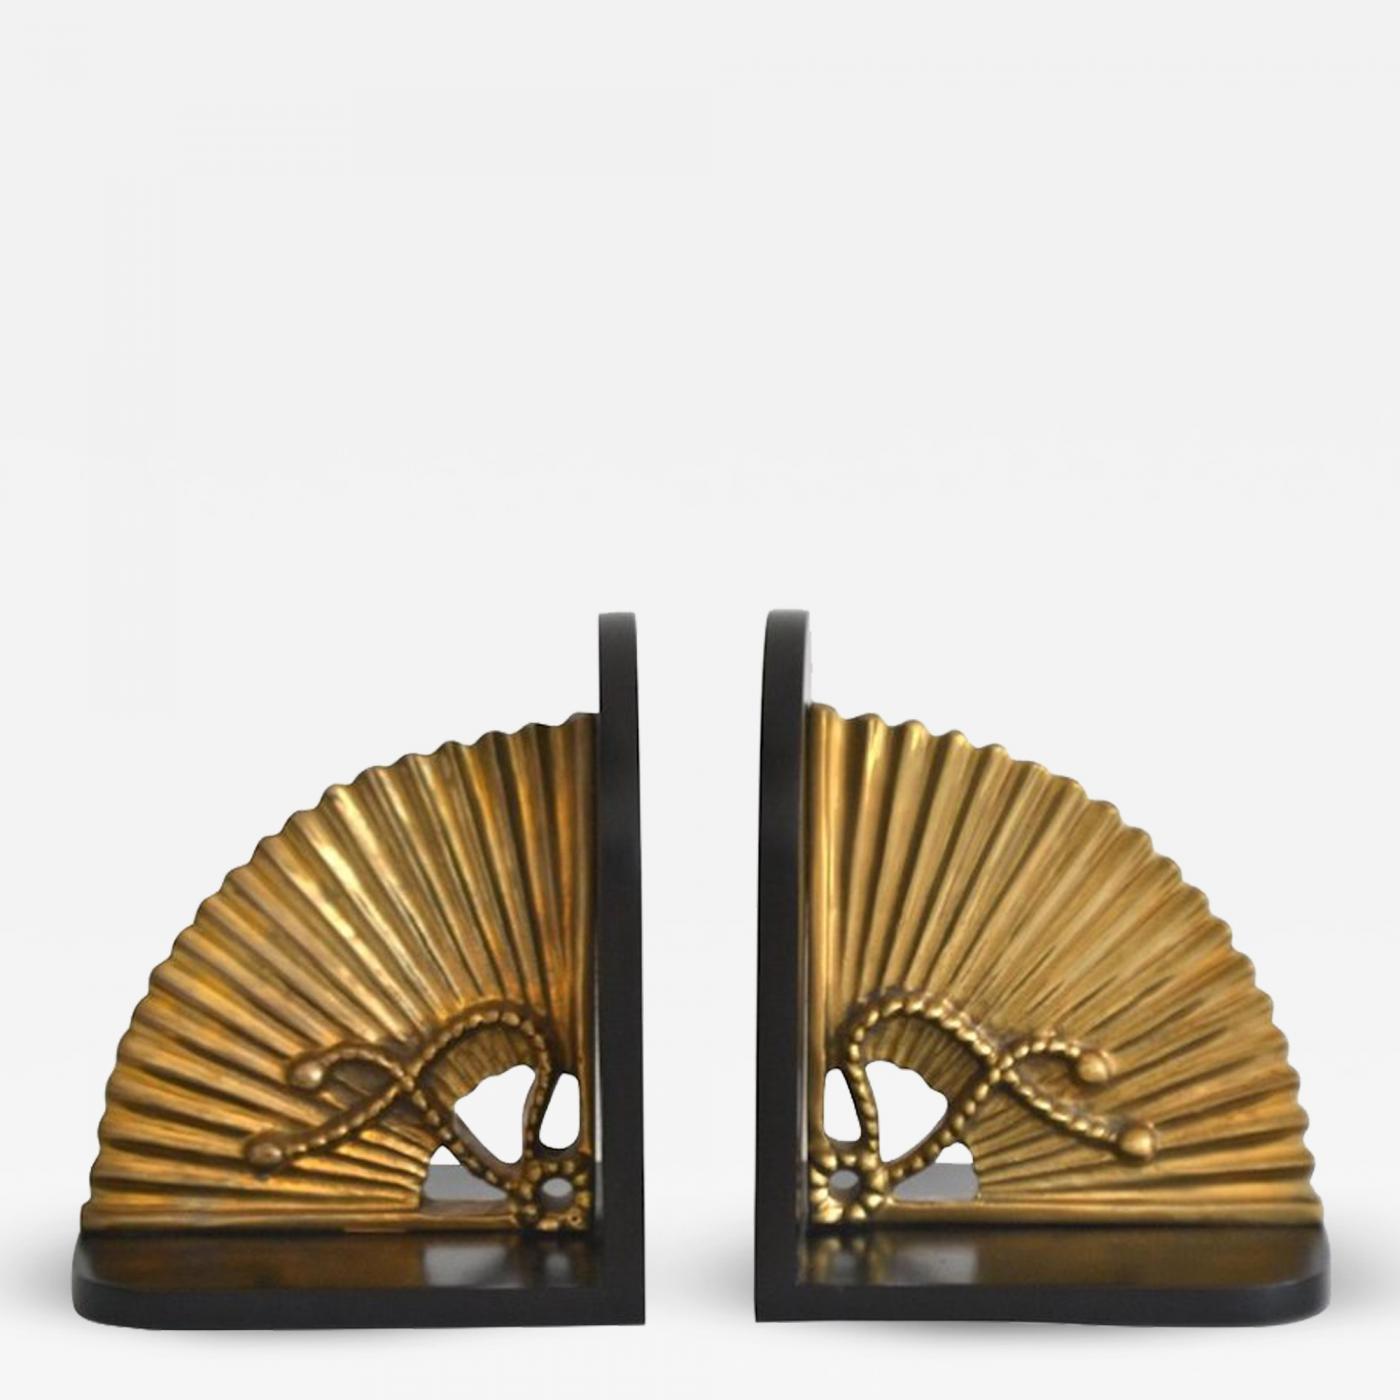 https://cdn.incollect.com/sites/default/files/zoom/Pair-of-Hollywood-Regency-Brass-Bookends-271290-787052.jpg